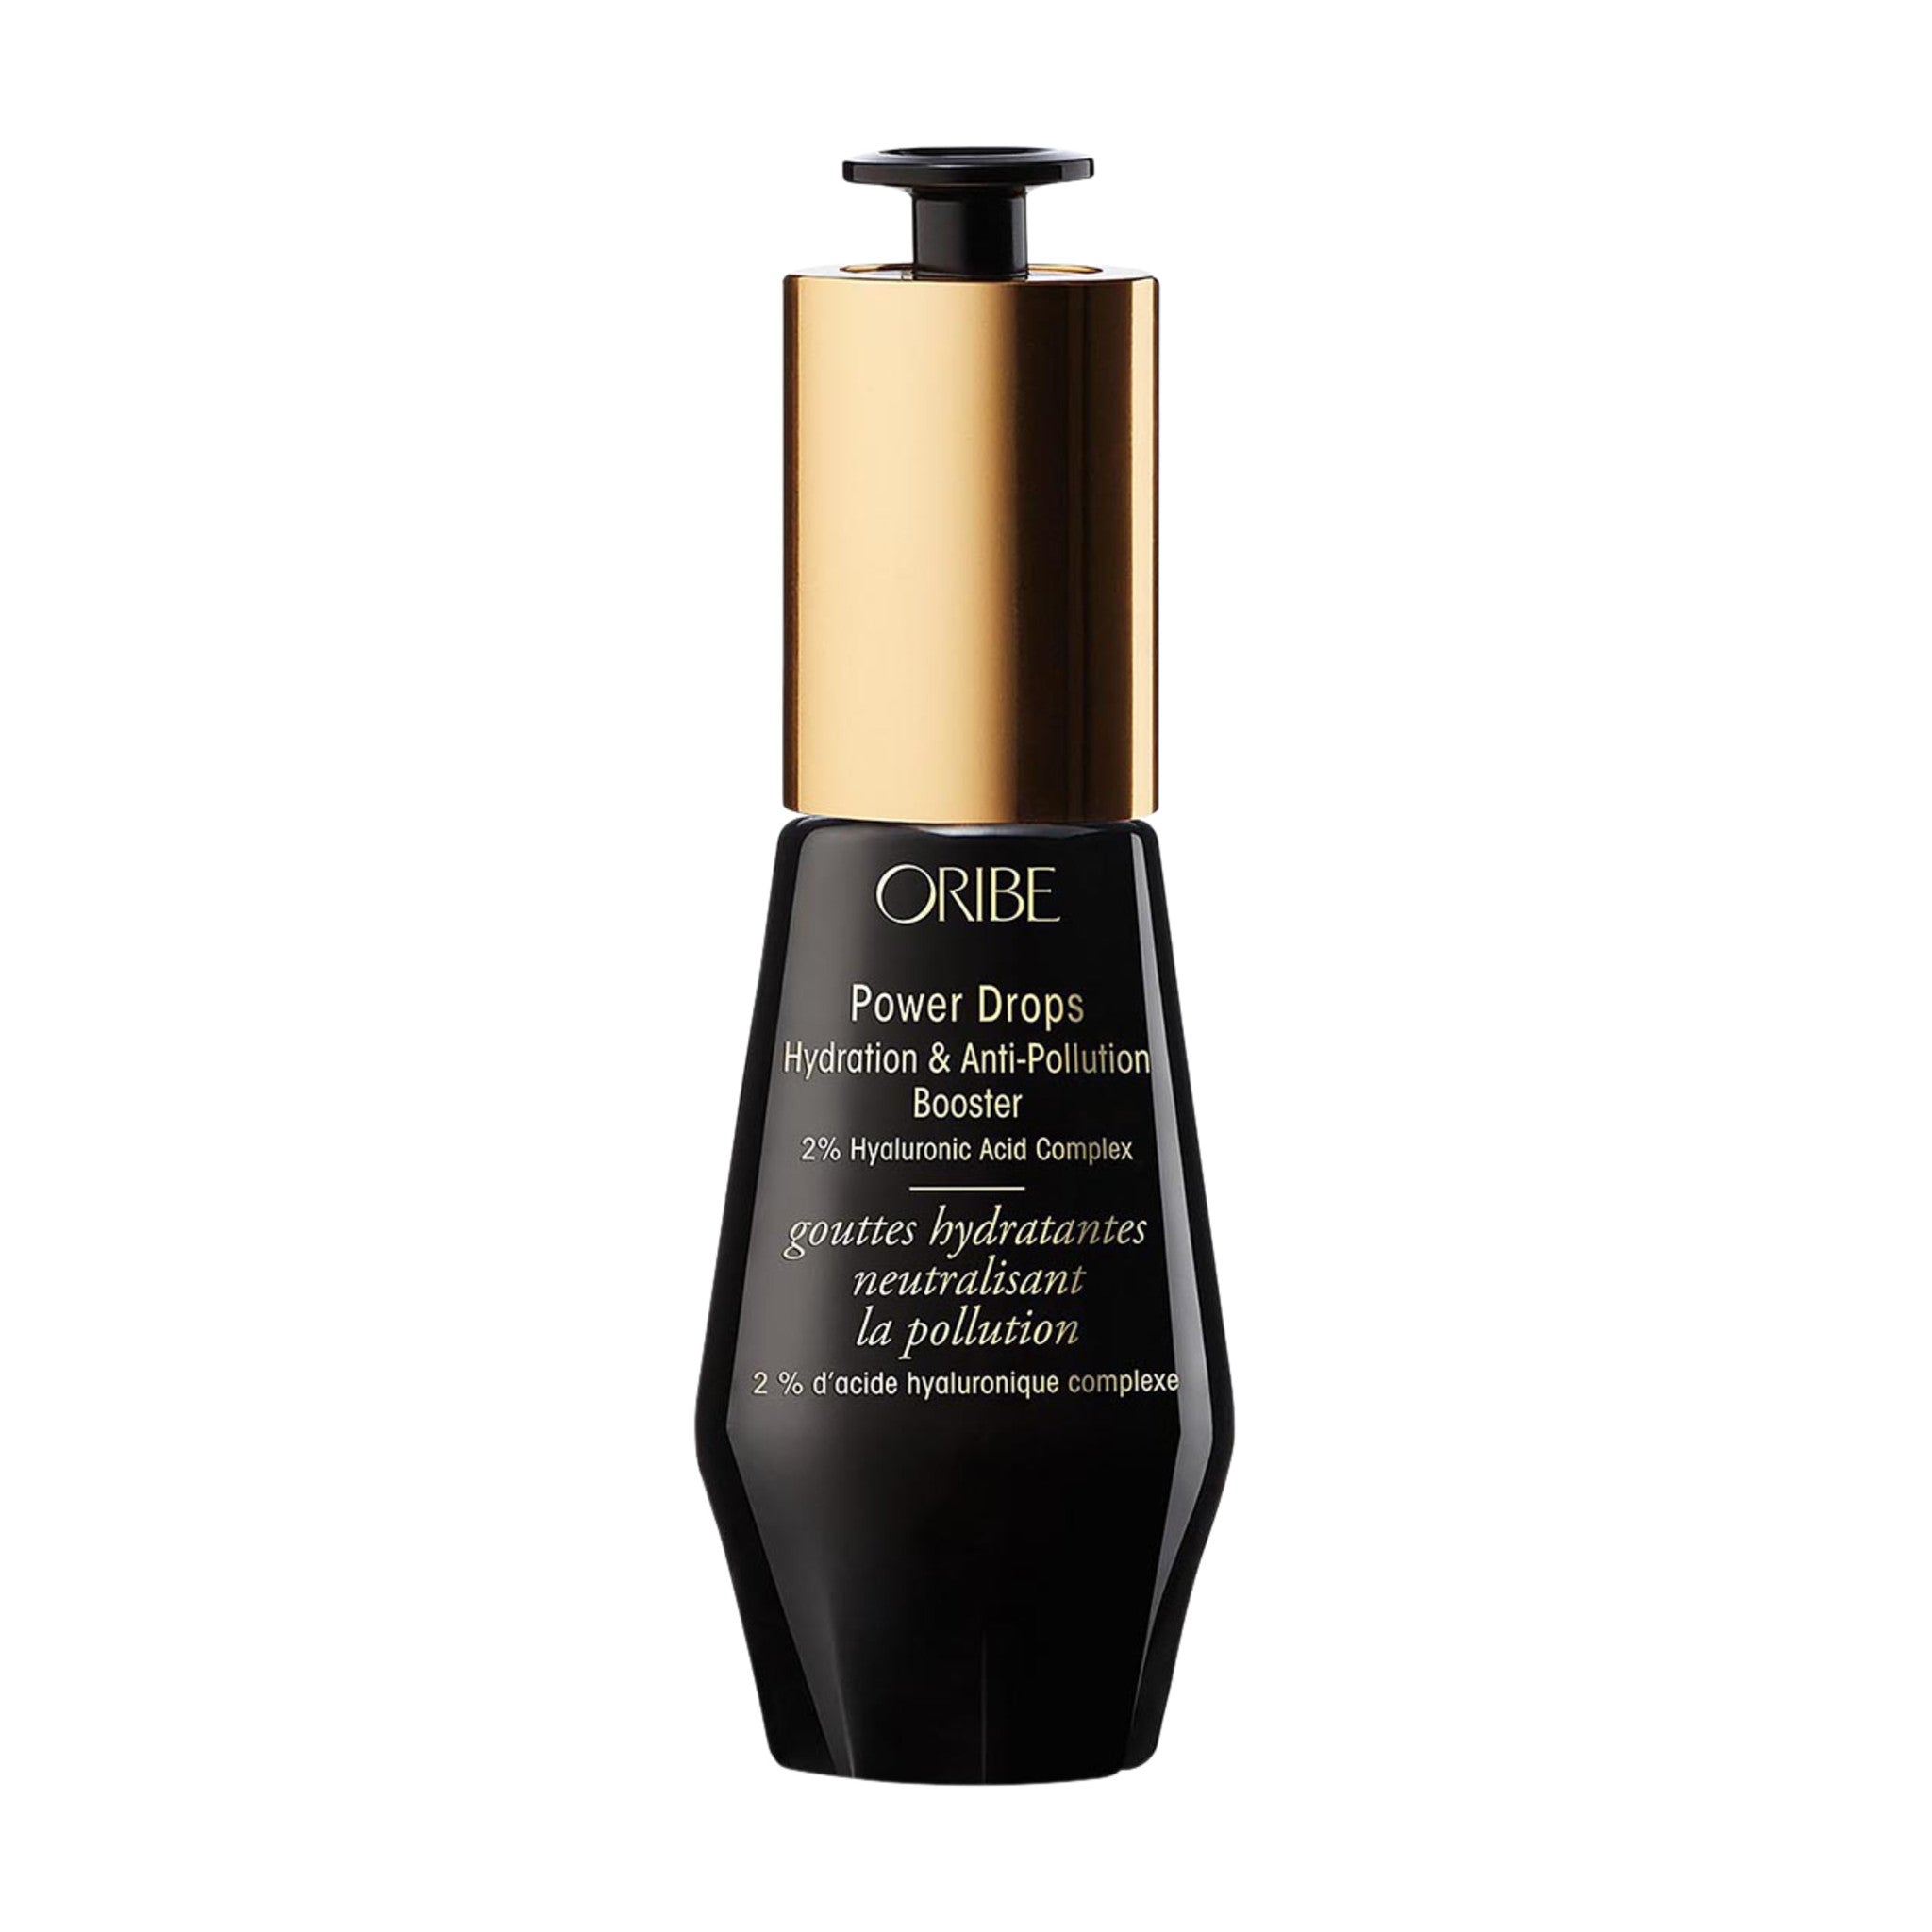 Oribe Power Drops Hydration and Anti-Pollution Booster main image.